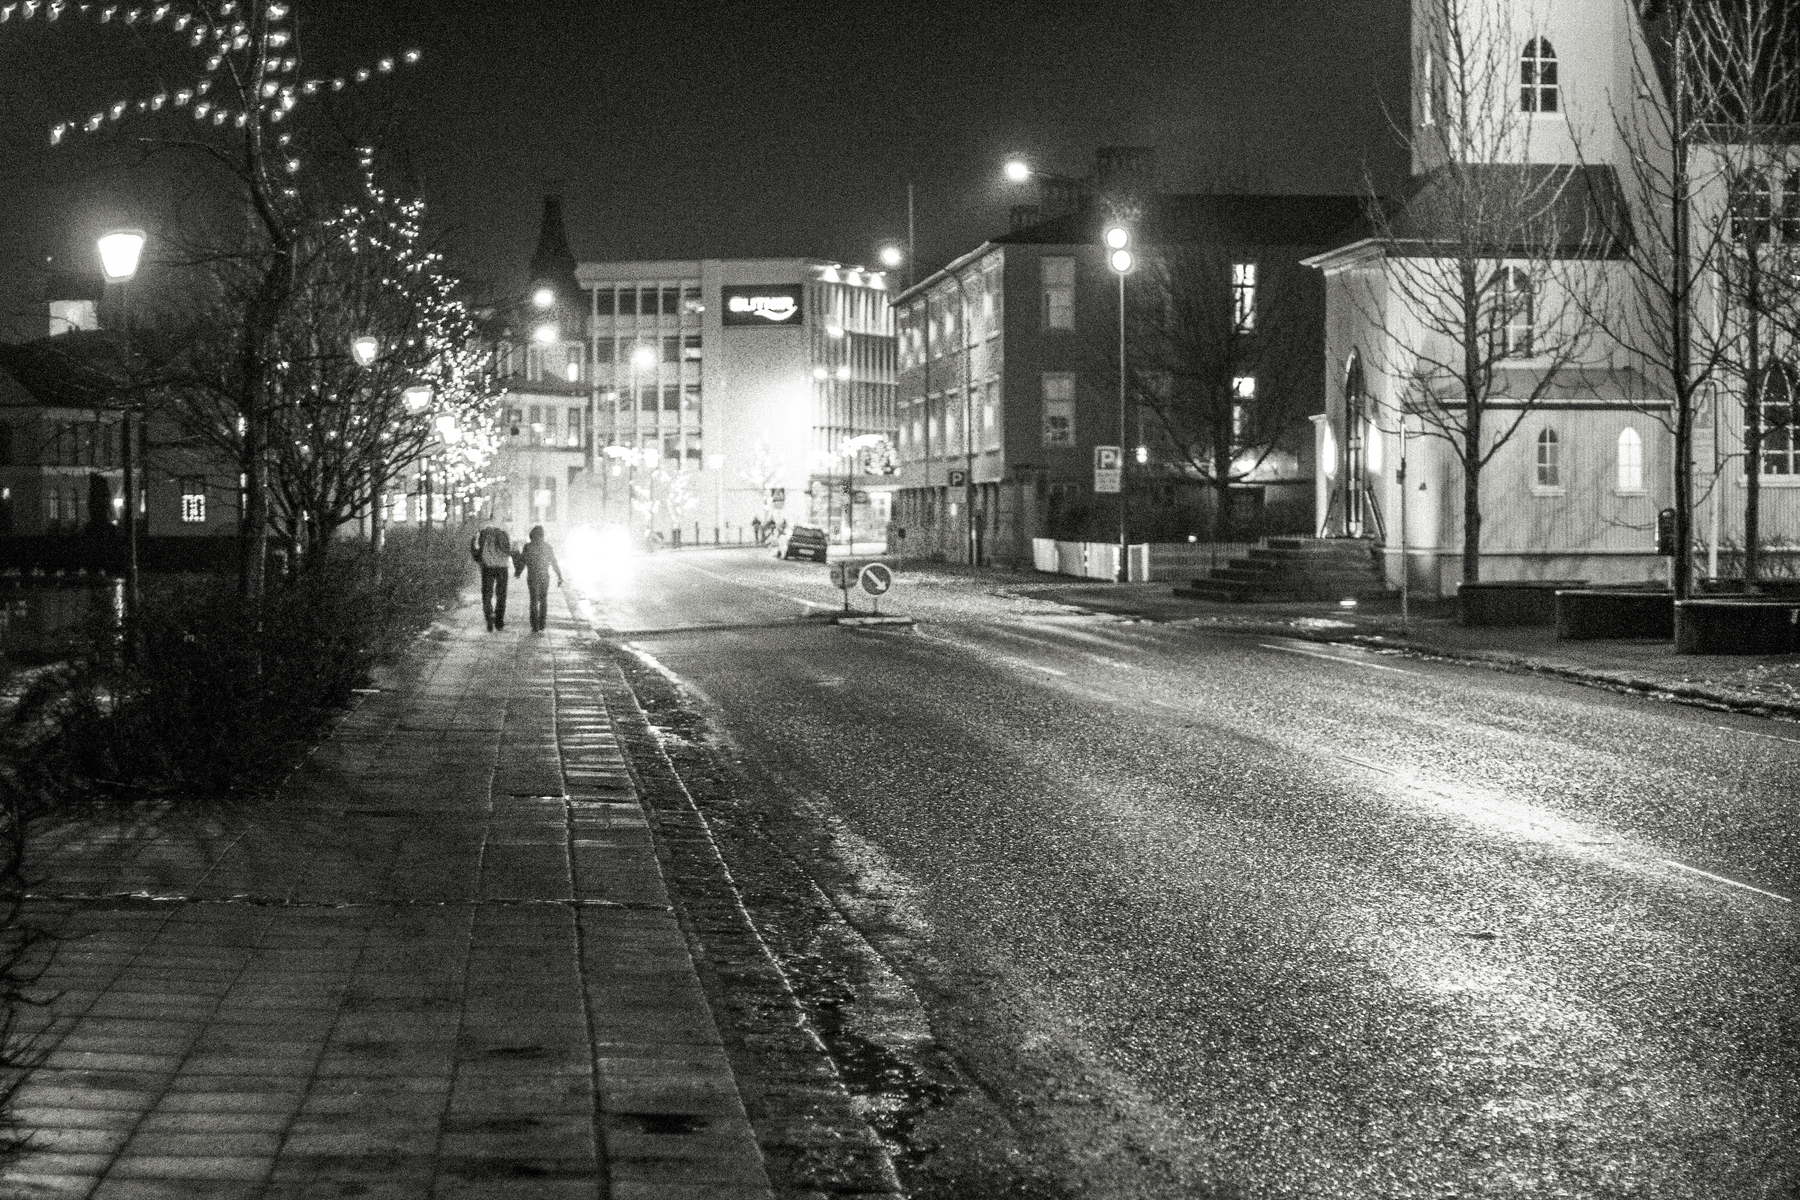 A couple walks along the pond in Reykjavík city centre. On their way home after a New Year’s Eve party. Or on their way to a late party.